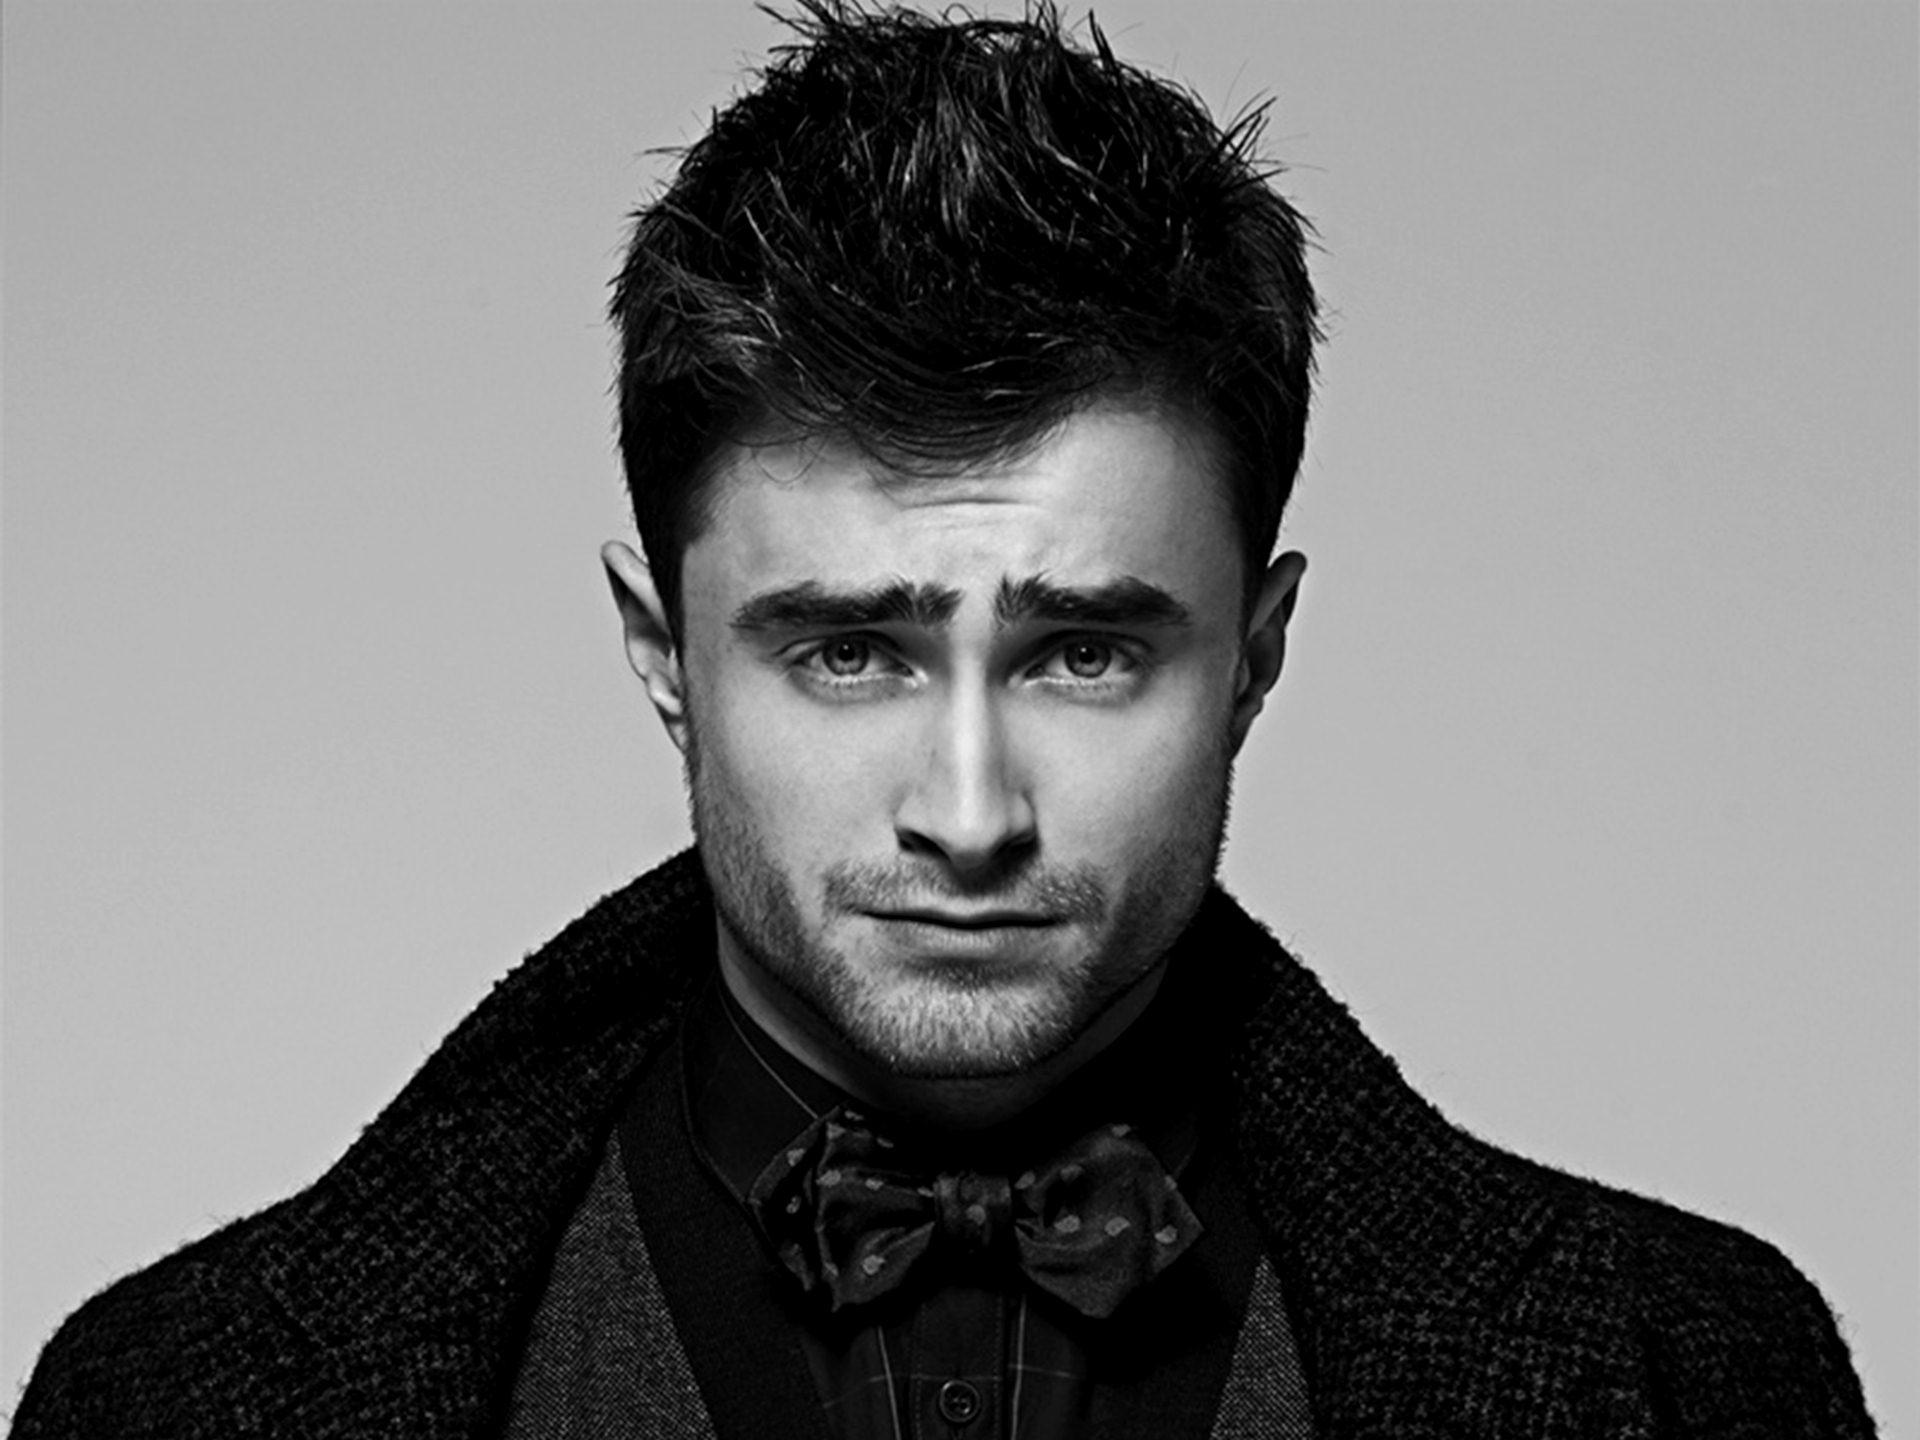 Daniel Radcliffe Wallpaper High Resolution and Quality Download